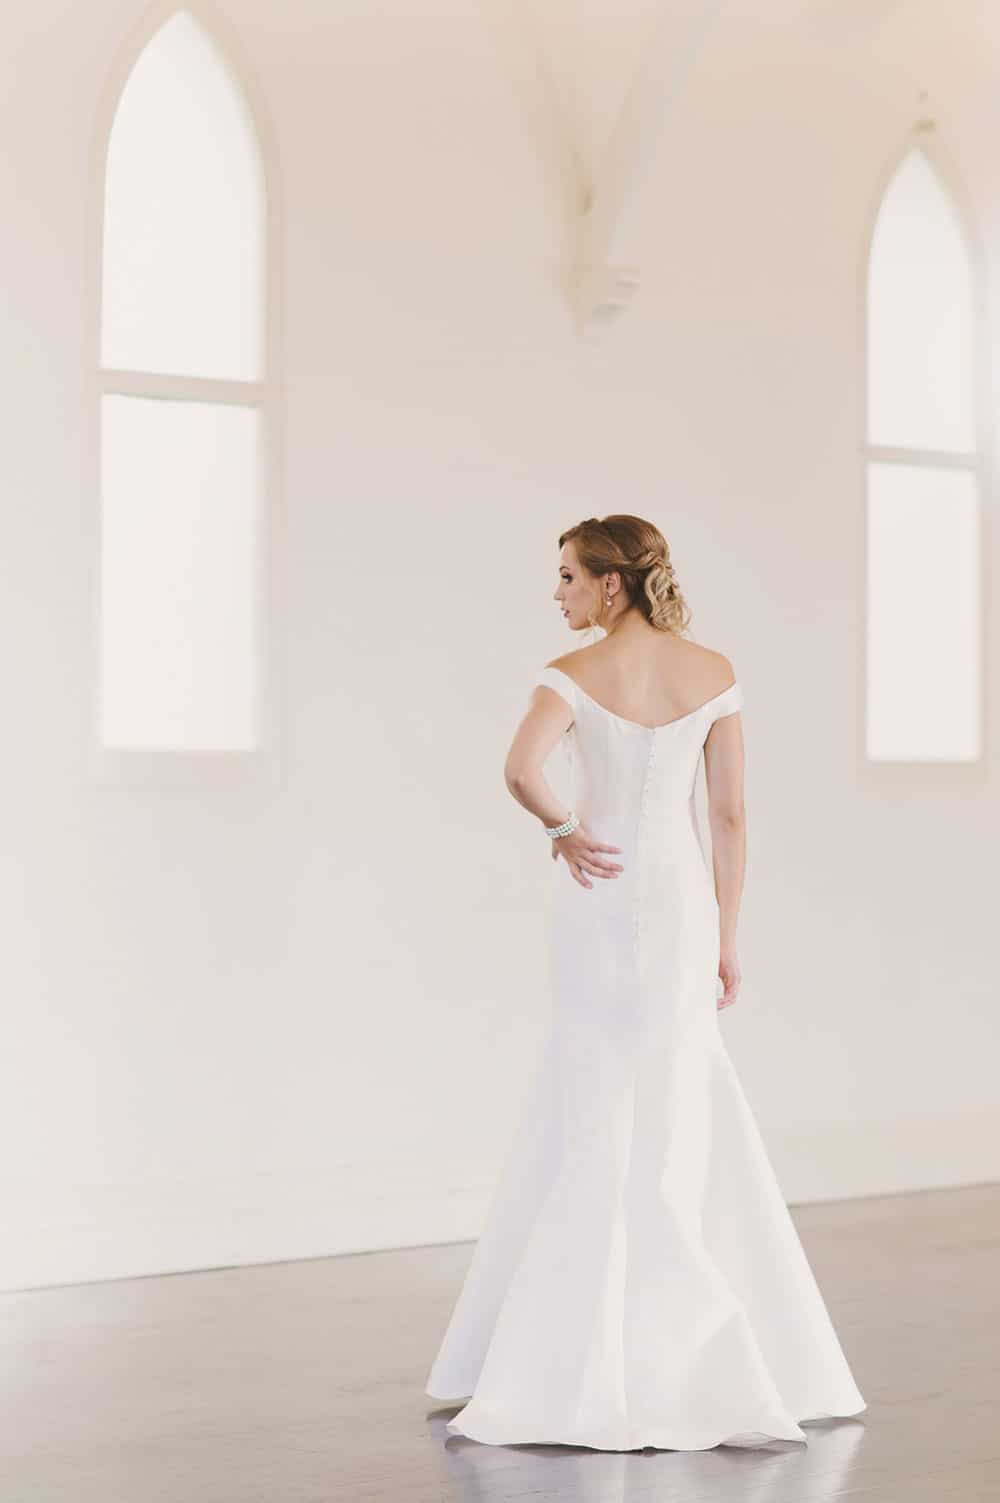 The Liza gown from Wendy Makin's Ready to Wear collection